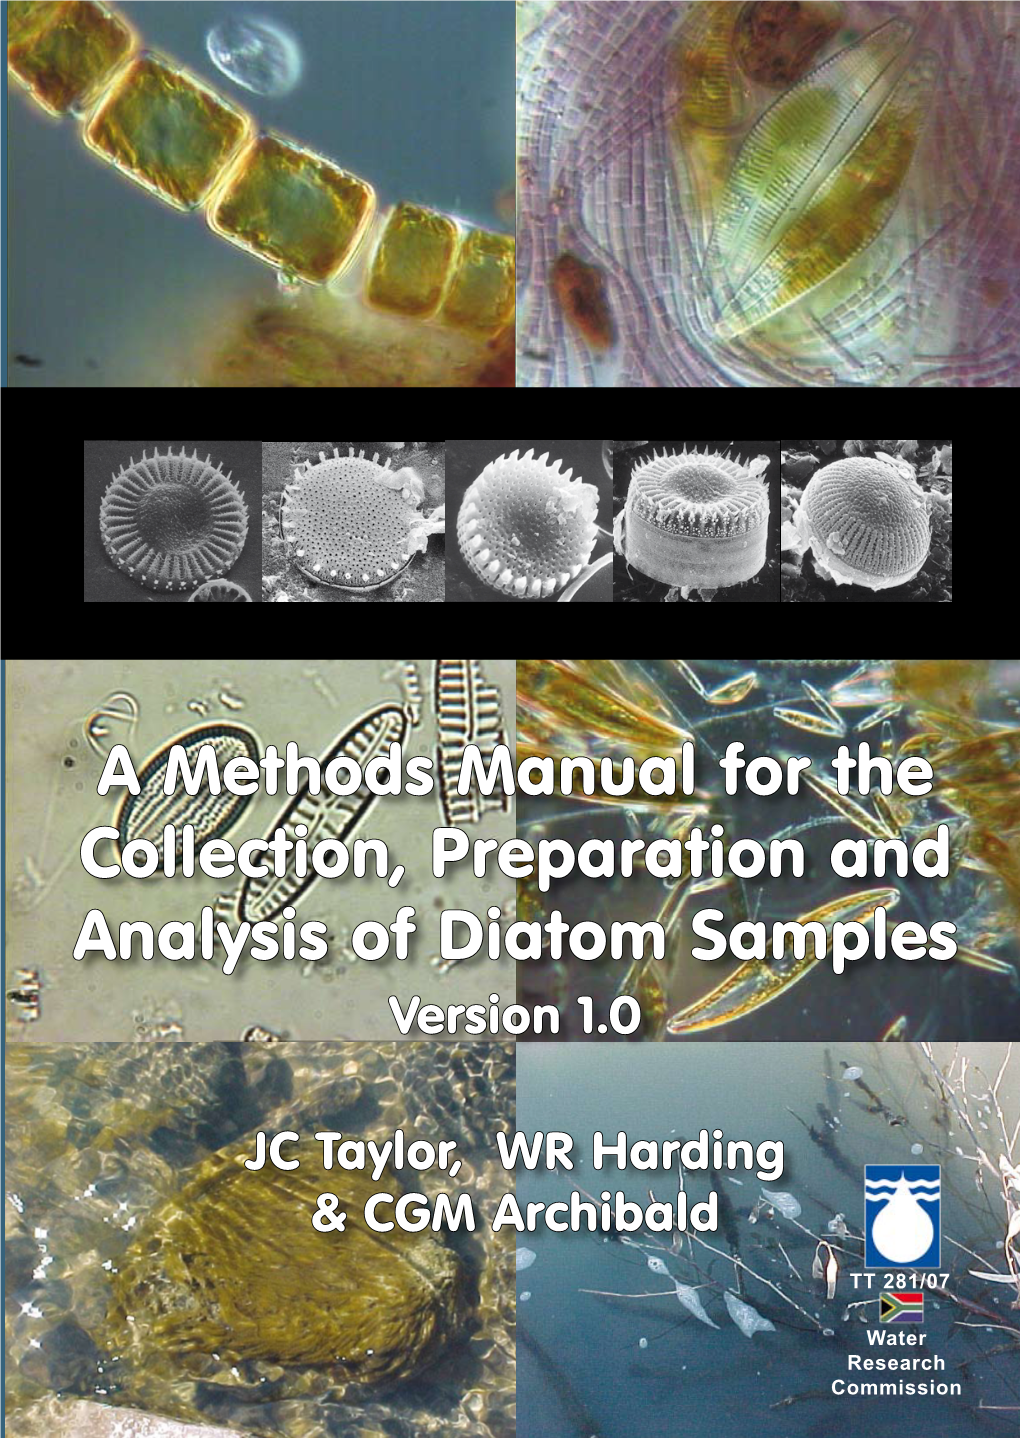 A Methods Manual for the Collection, Preparation and Analysis of Diatom Samples Version 1.0